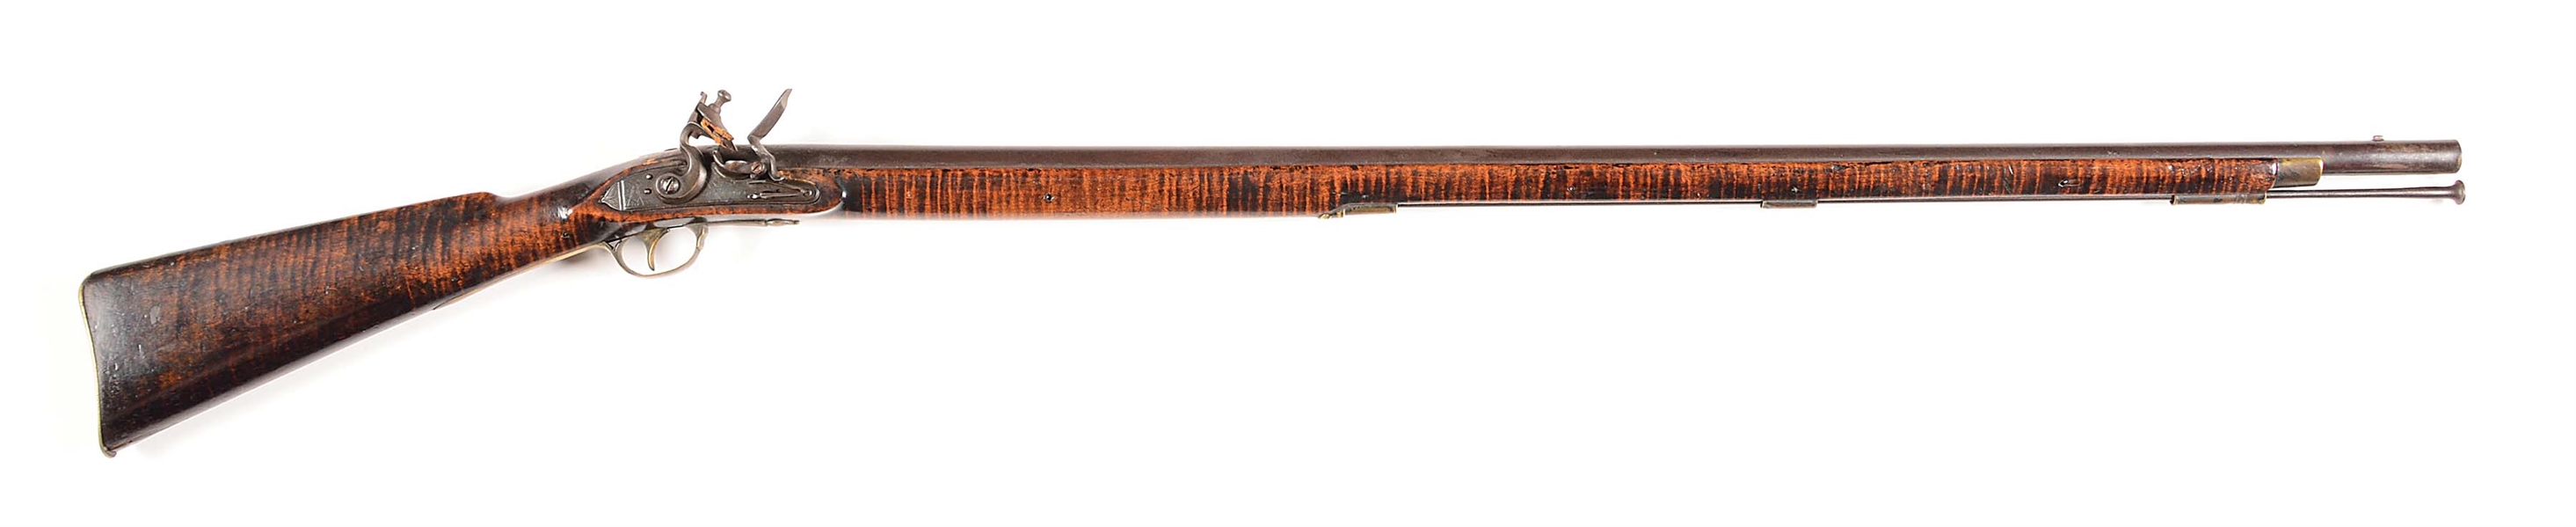 (A) TIGER MAPLE STOCKED NEW ENGLAND FLINTLOCK OFFICERS MUSKET WITH MASONIC MARKED LOCK.